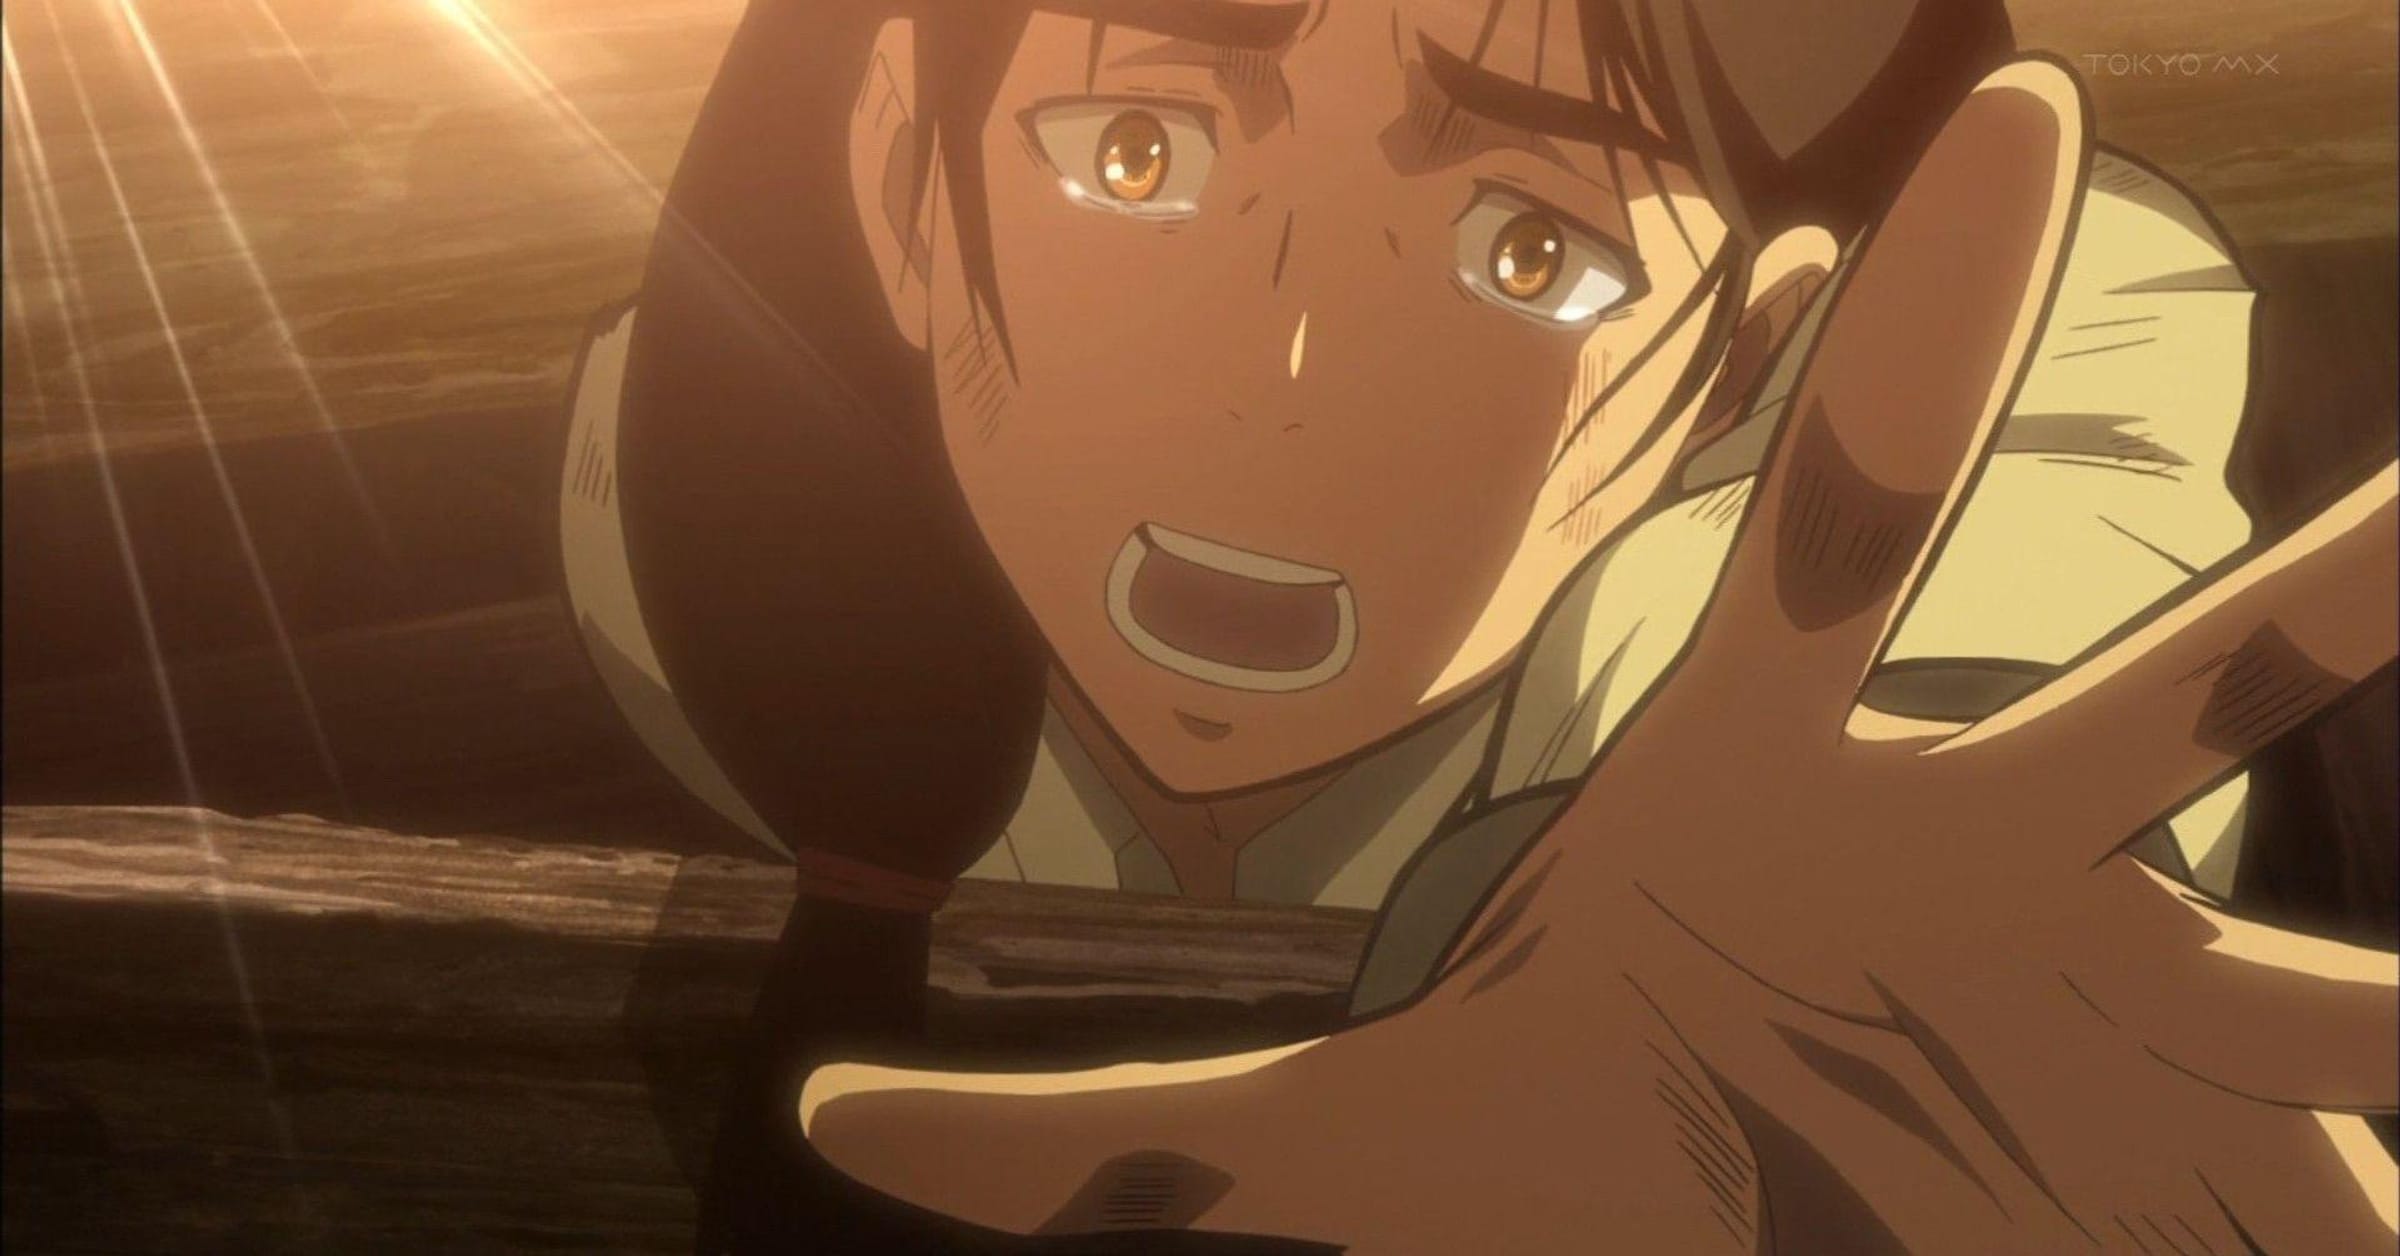 Top 10 Heartbreaking Attack on Titan Moments